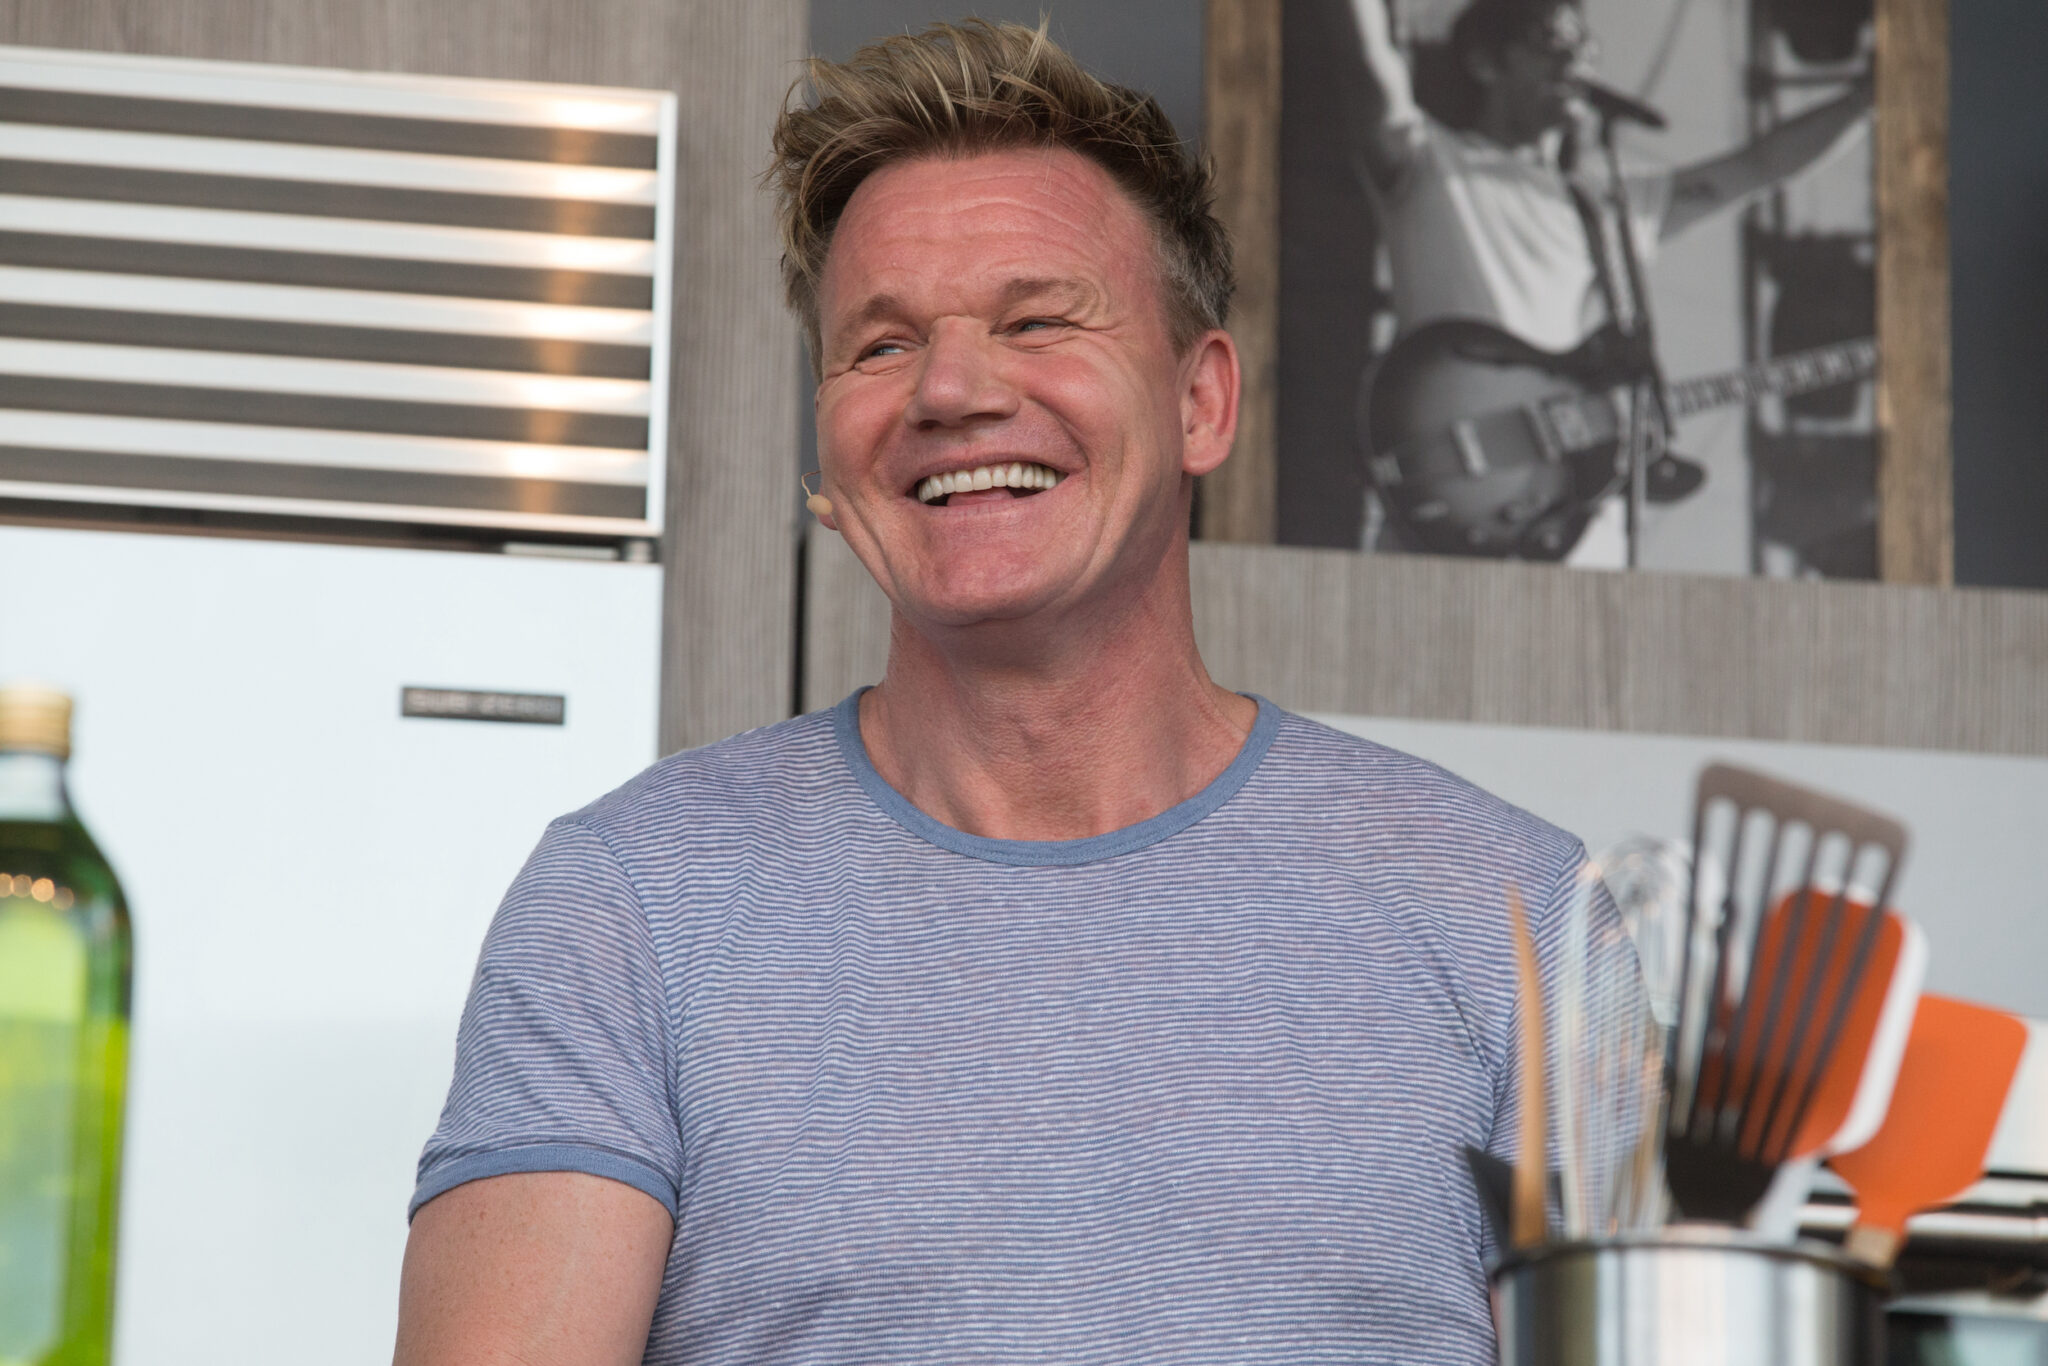 What Cologne Does Gordon Ramsay Wear?